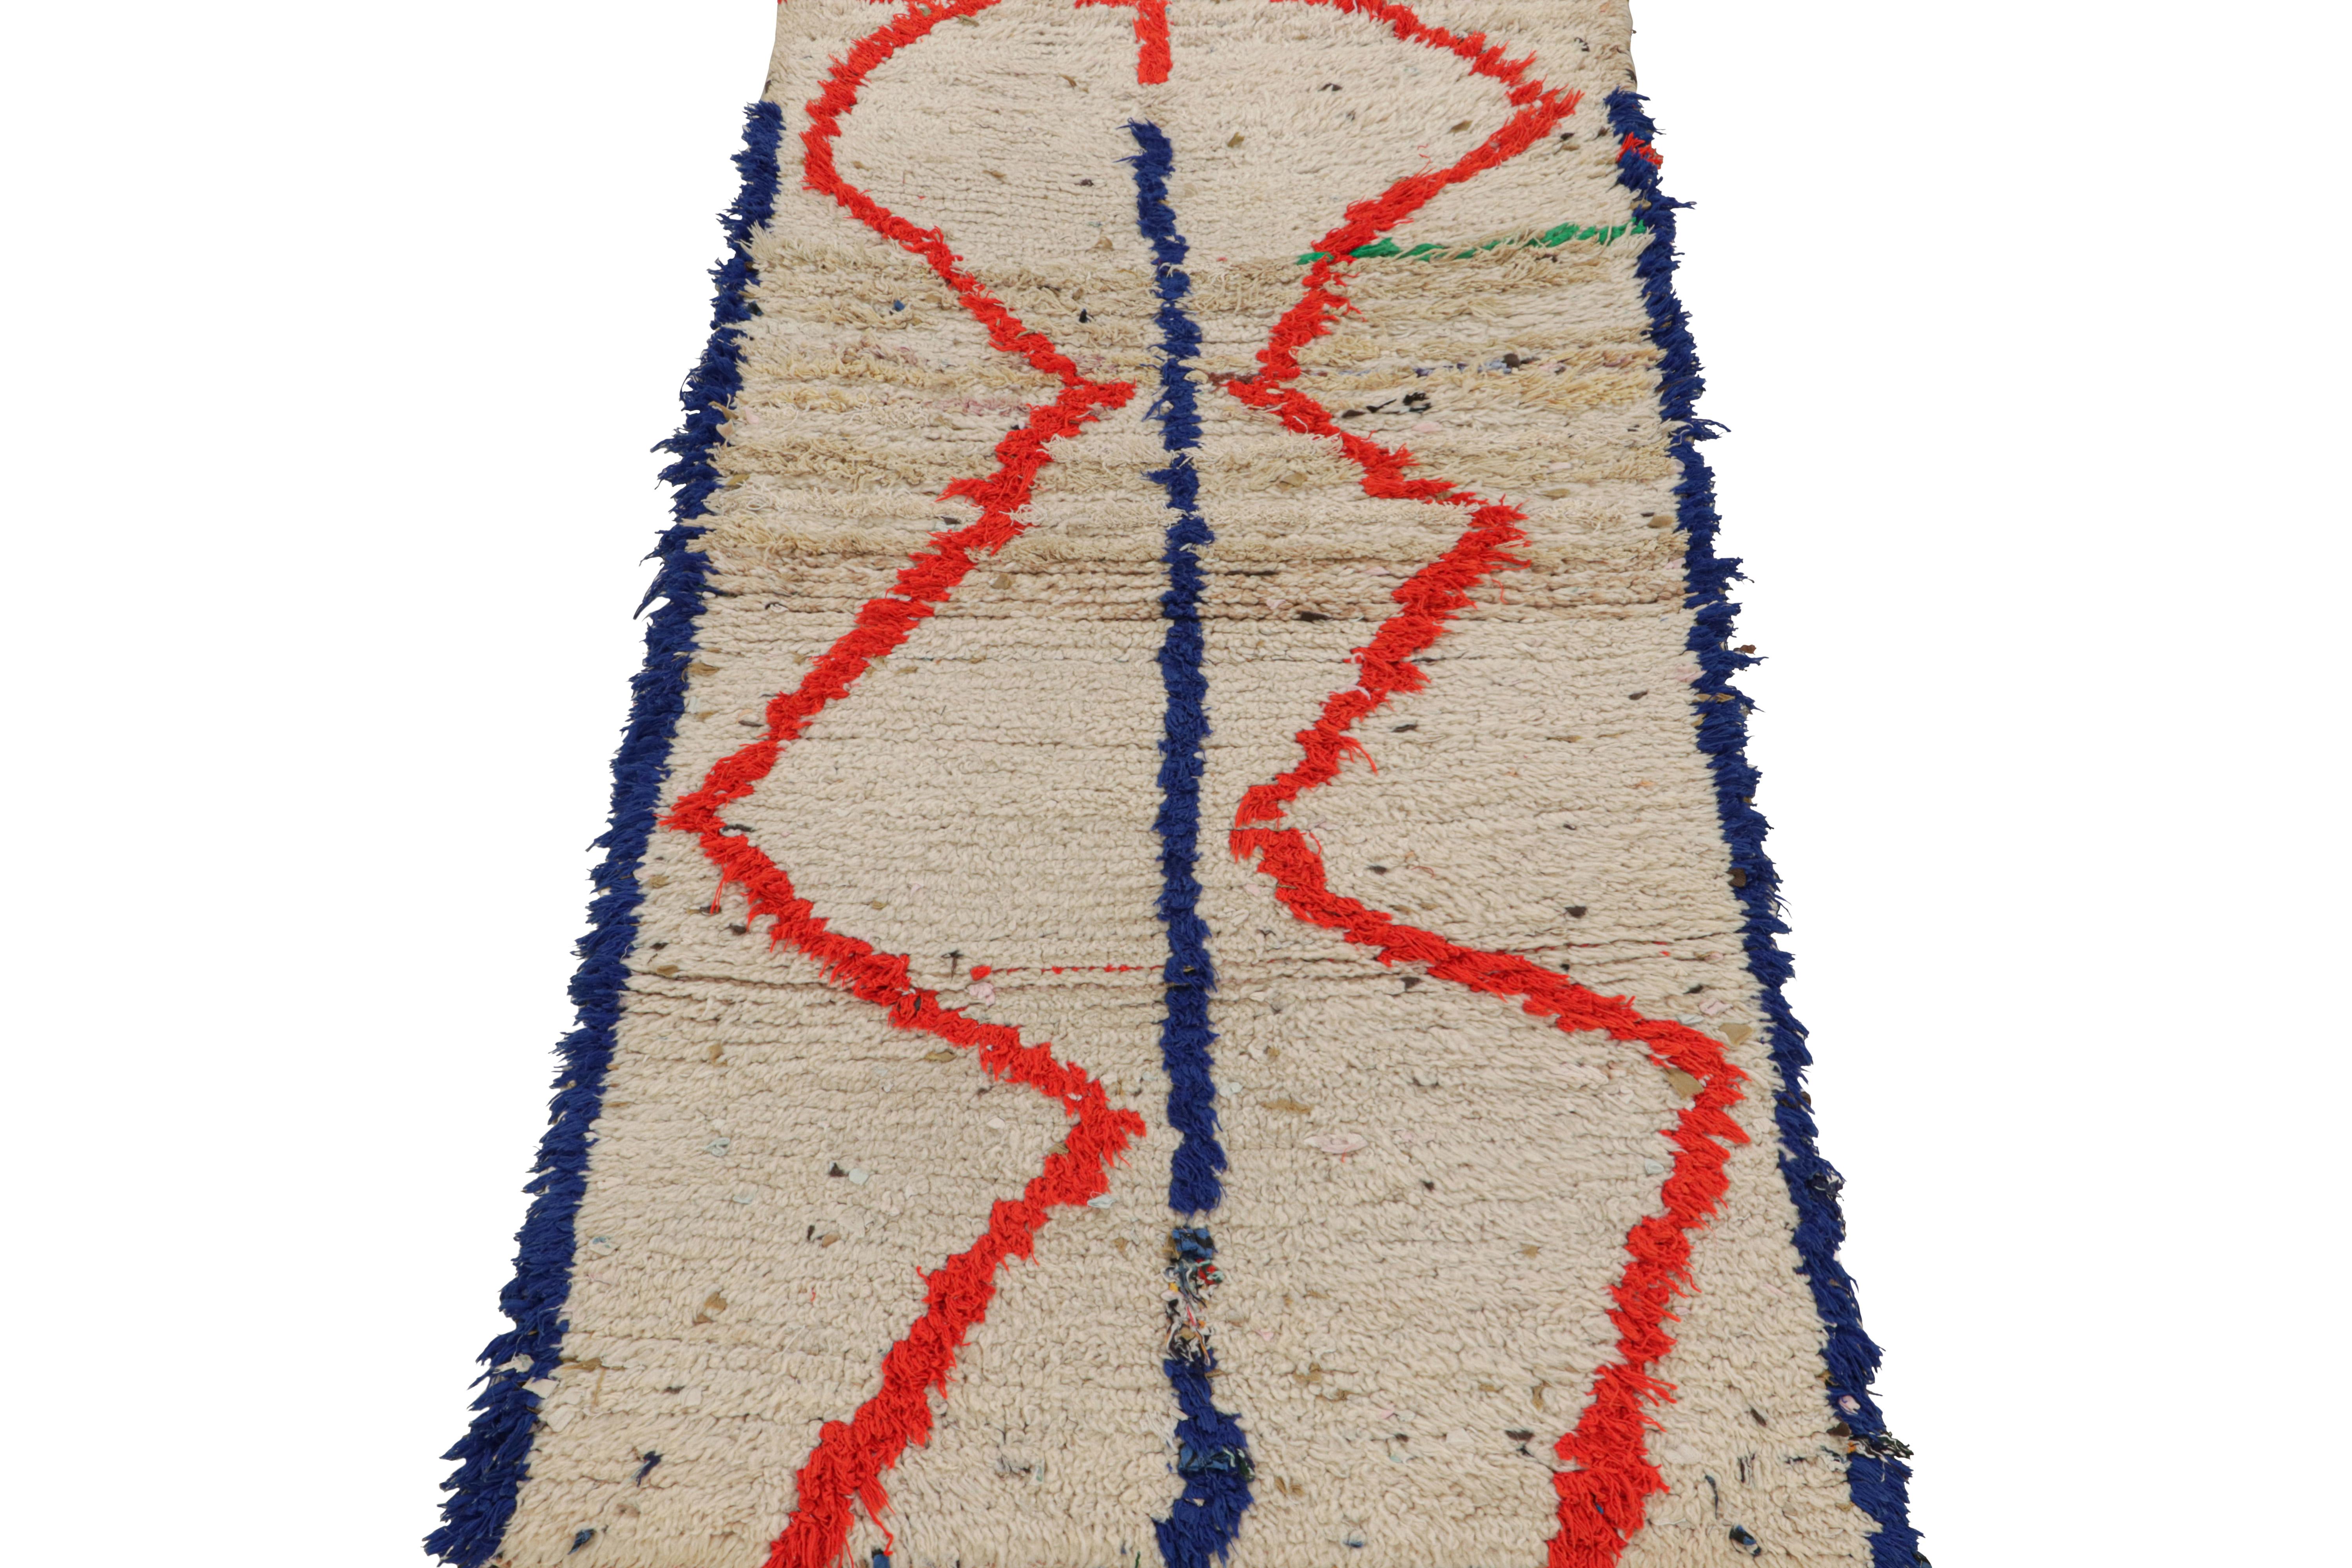 Hand-Woven Vintage Azilal Moroccan Runner Rug, with Geometric Patterns from Rug & Kilim For Sale